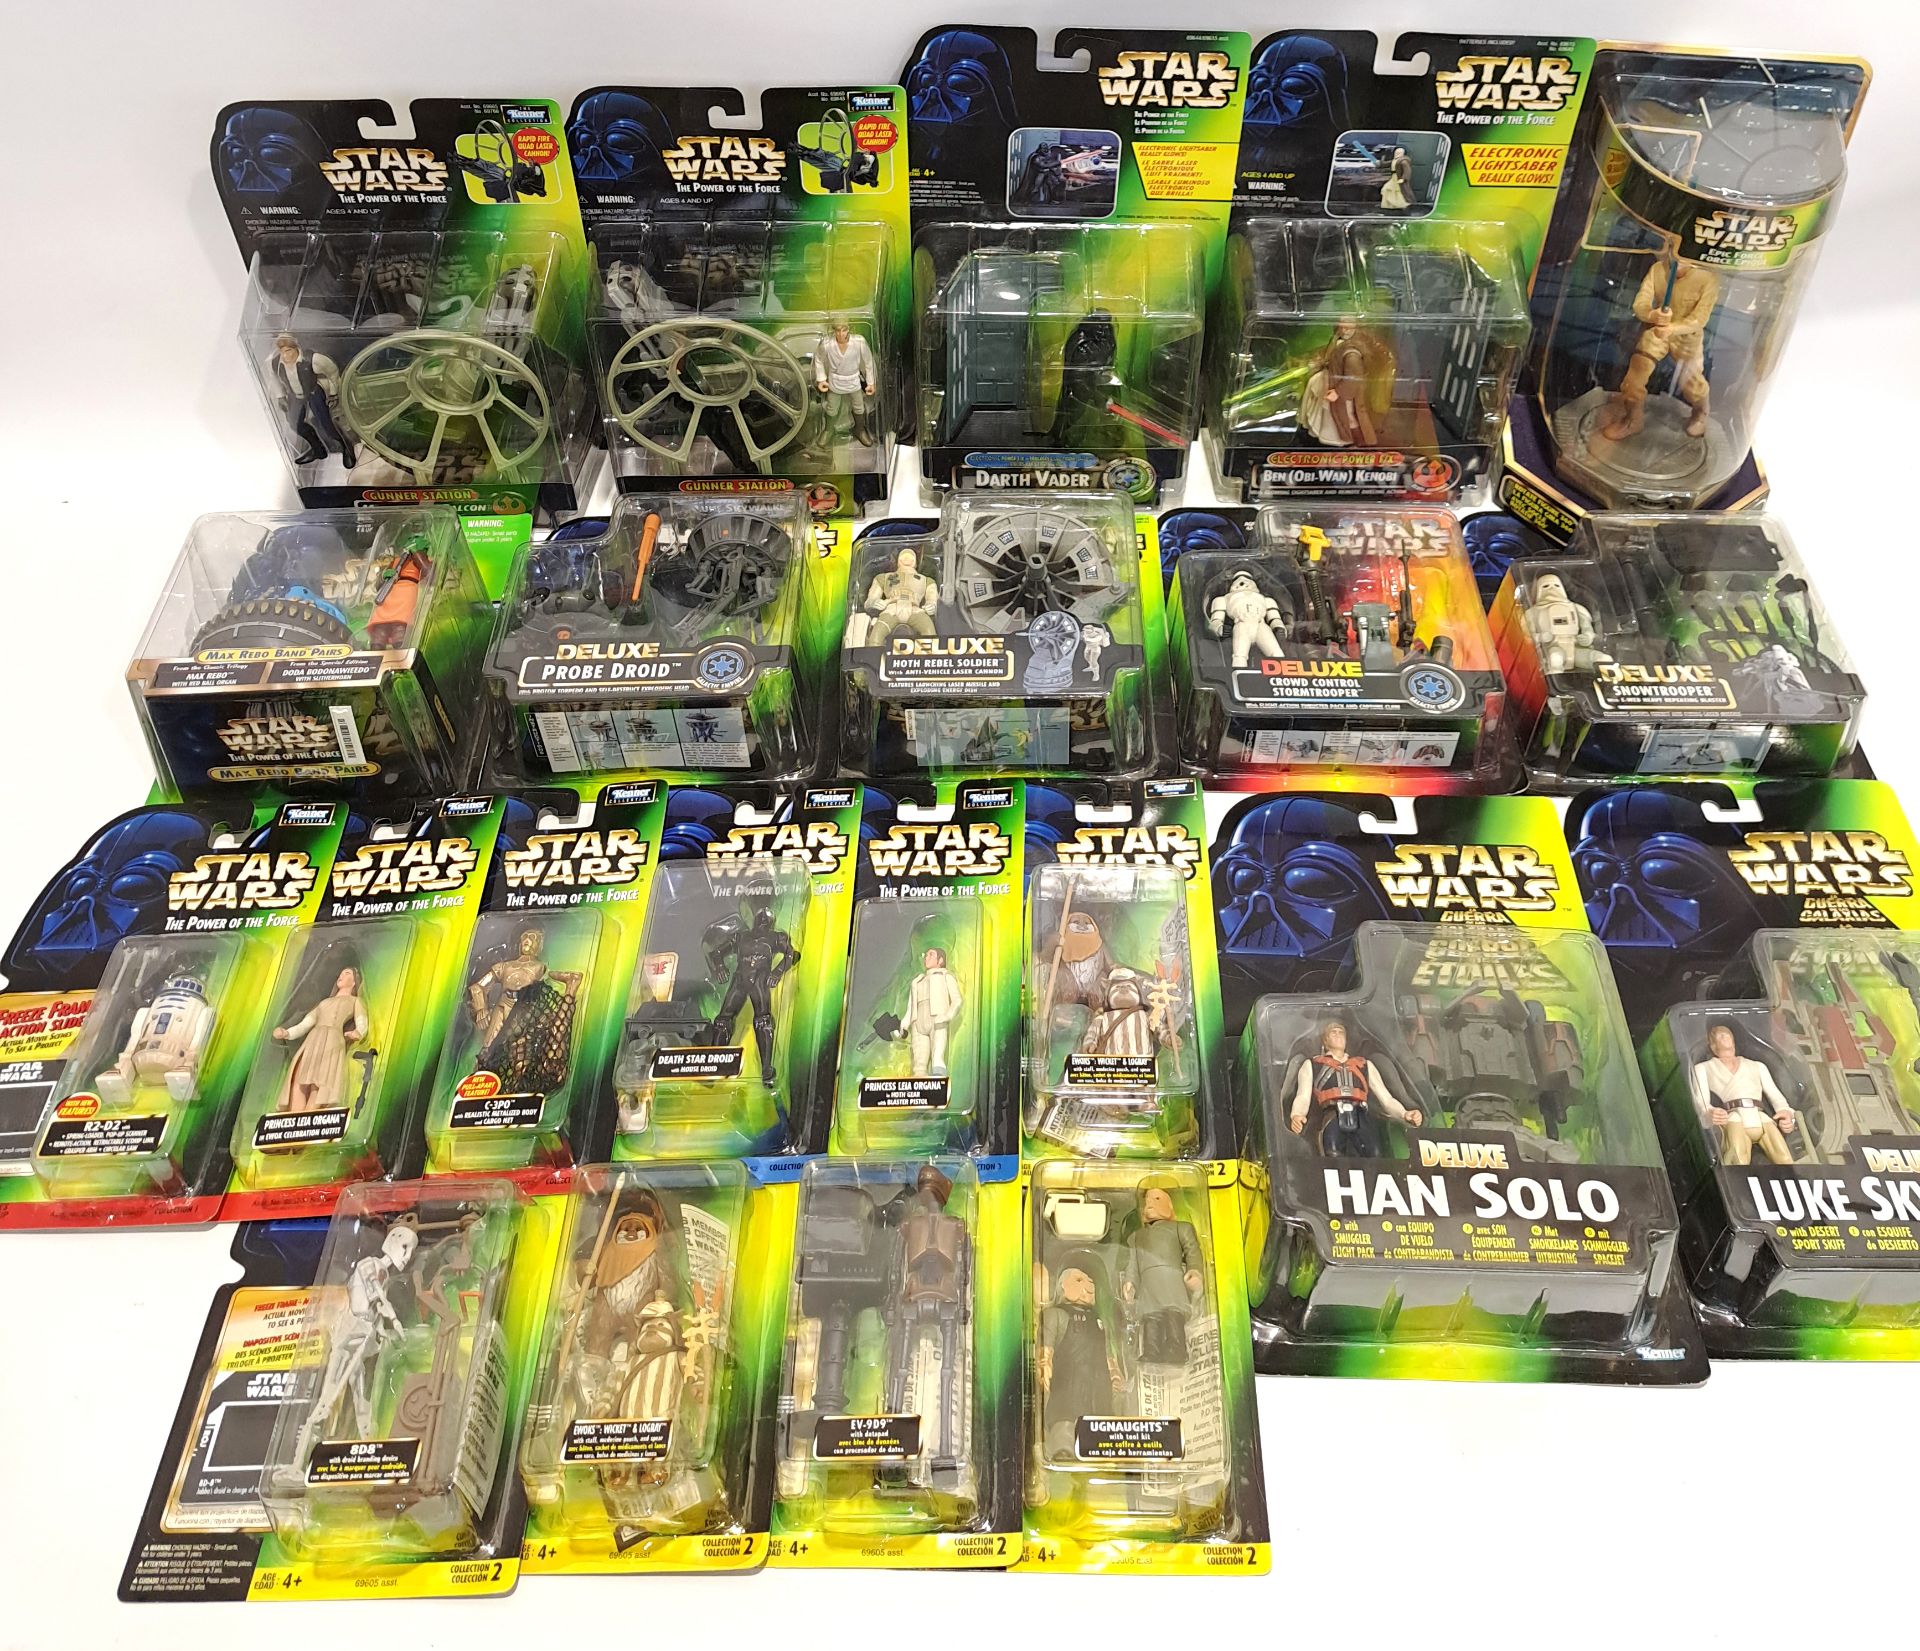 Quantity of Kenner Star Wars Power of the Force Carded Action Figures